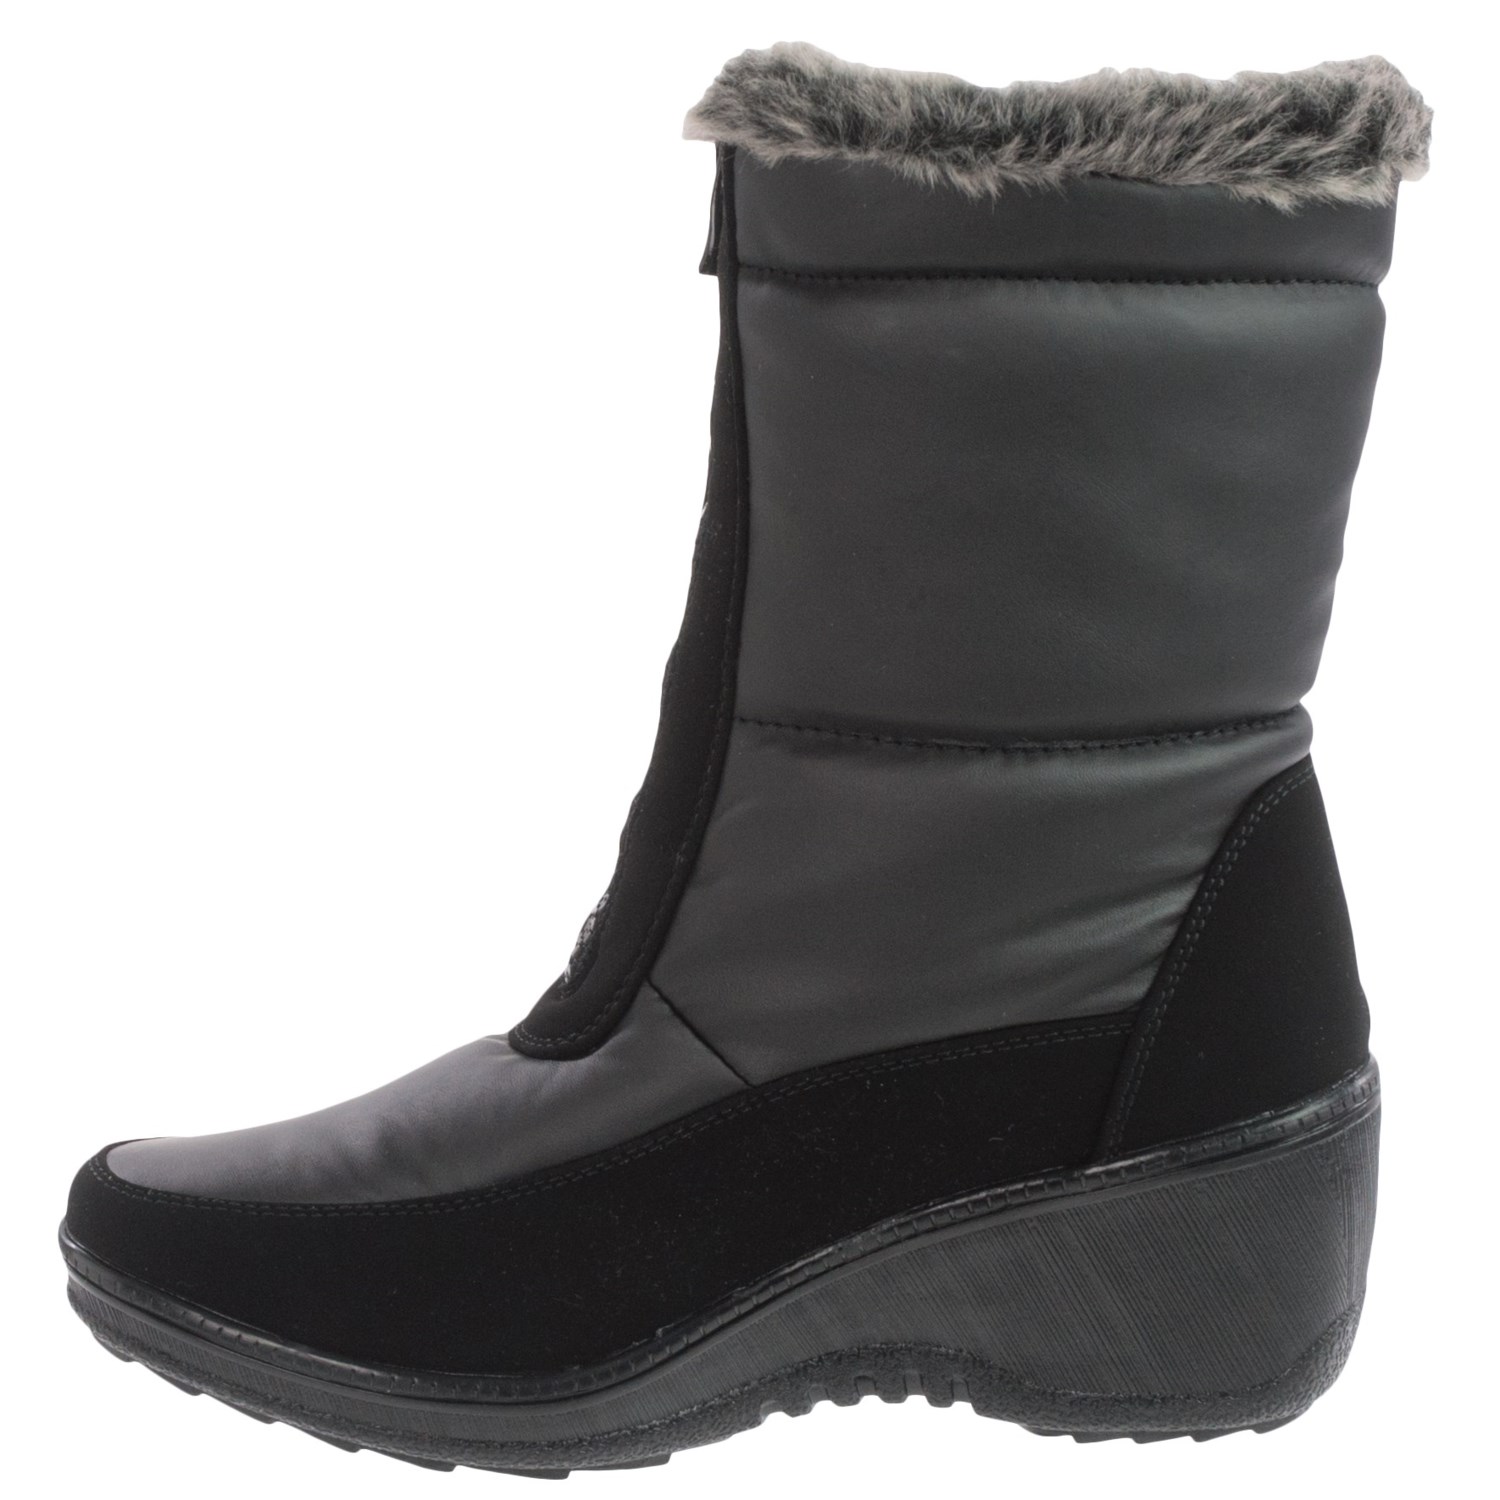 Aquatherm by Santana Canada Wynter Snow Boots (For Women) 9079M - Save 56%